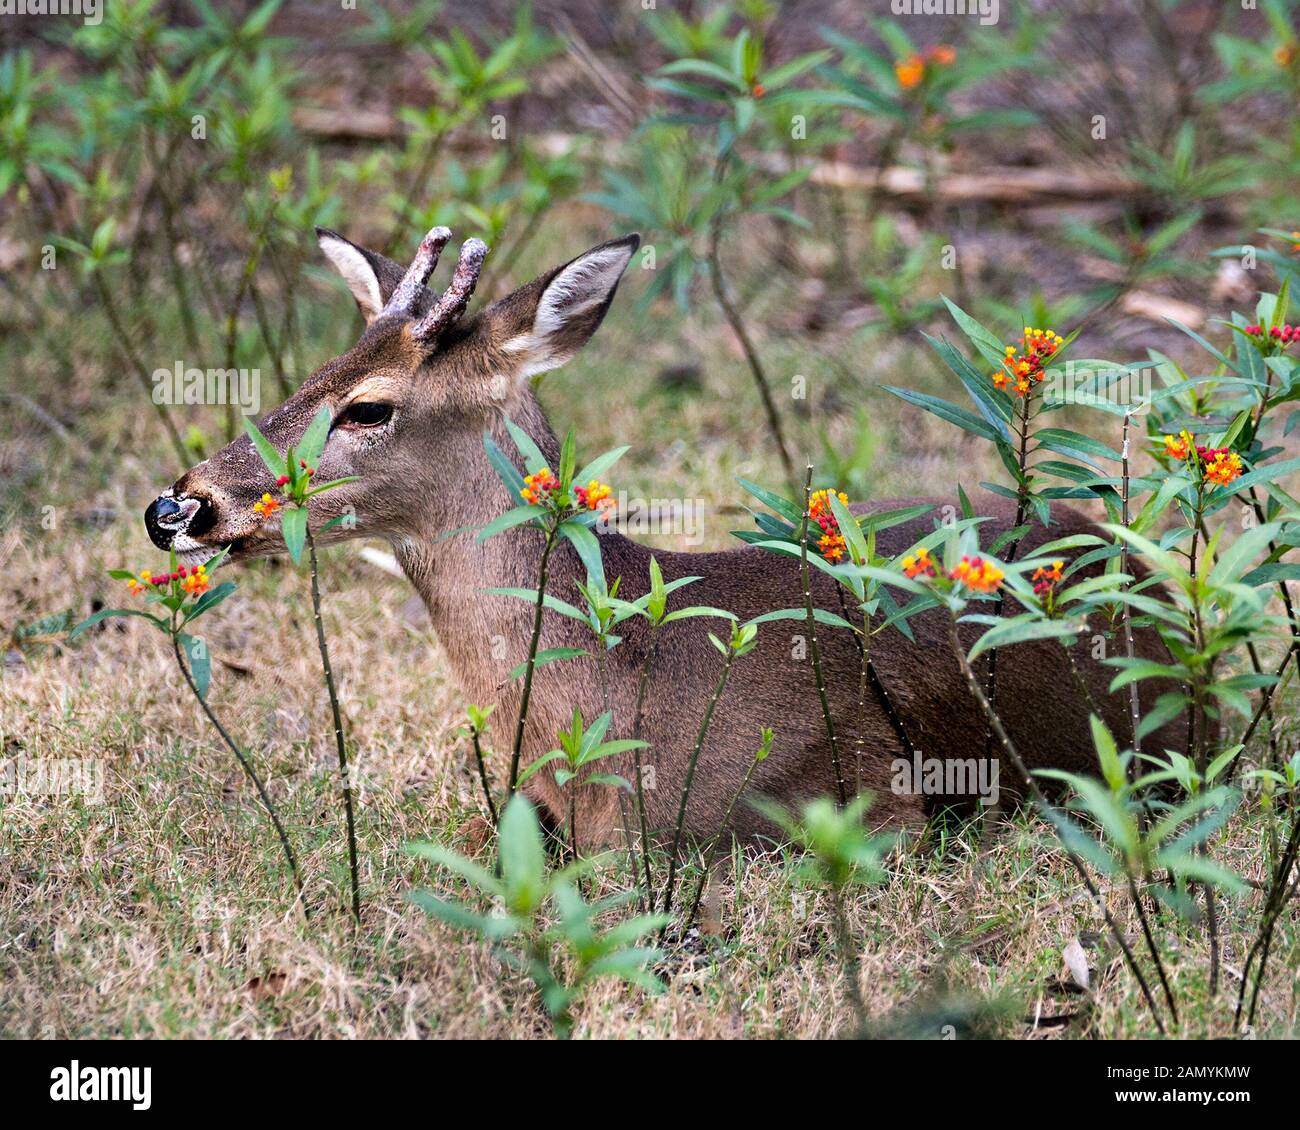 Deer animal close-up view displaying head, brown fur, antlers, ears, eyes, nose, legs with wildflowers foreground and bokeh backgroun in its environme Stock Photo